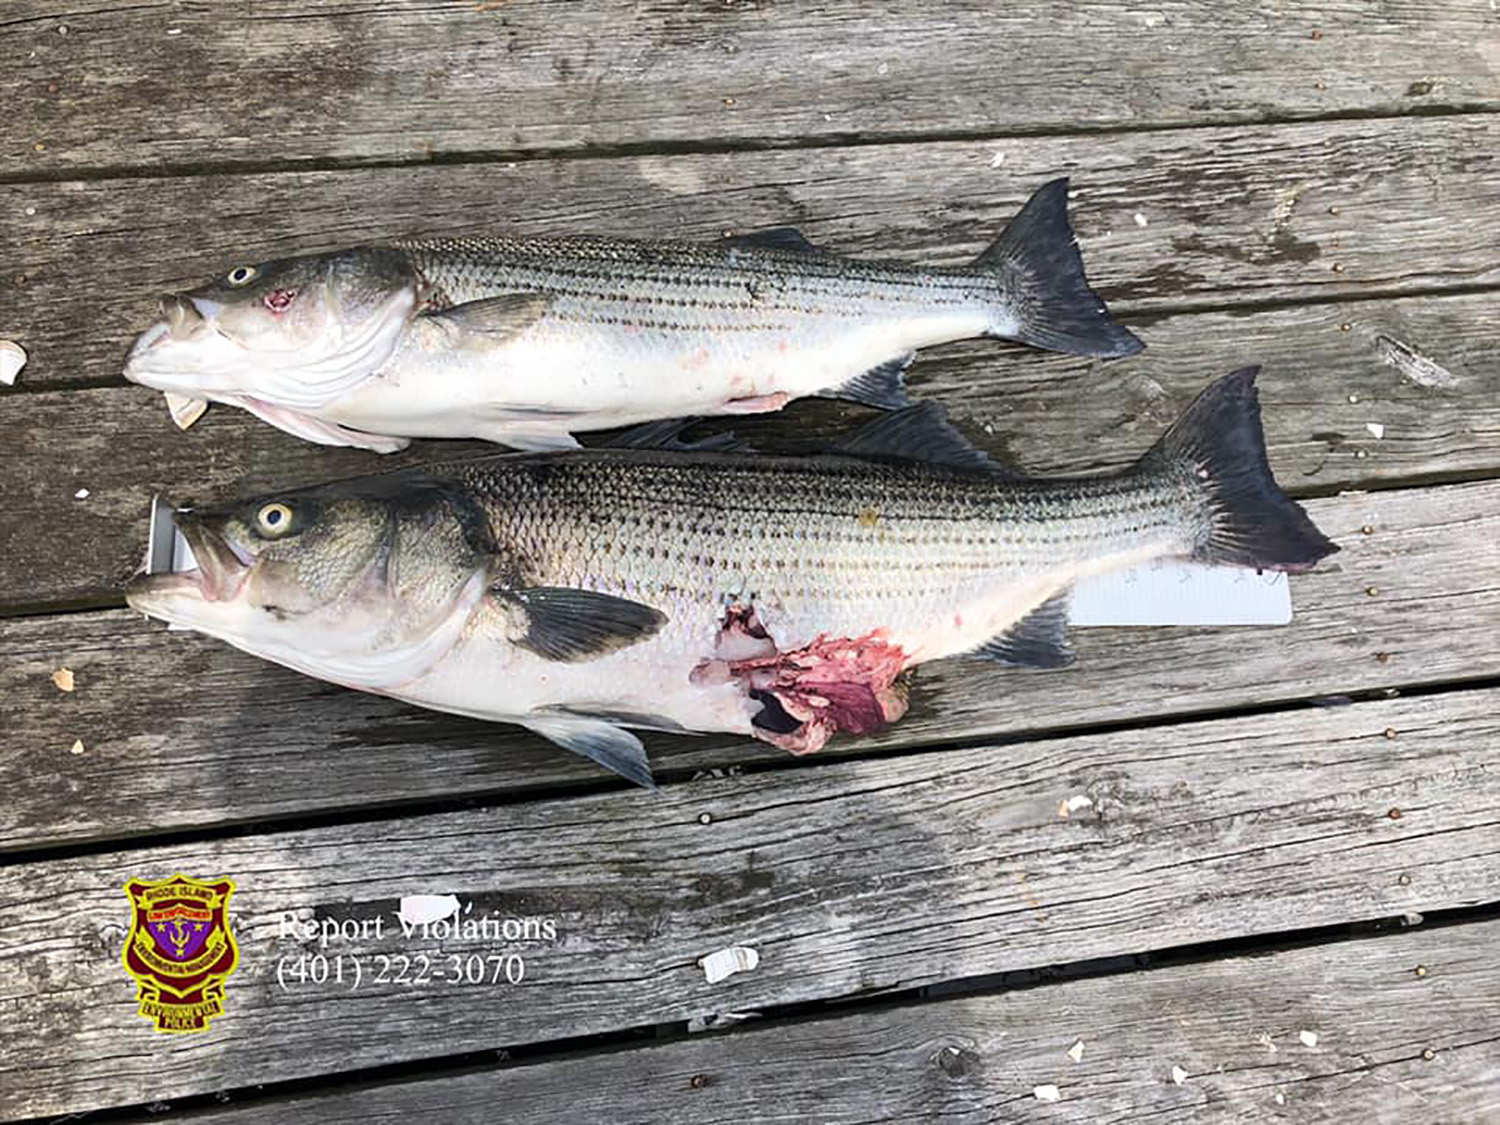 poachers caught with striped bass